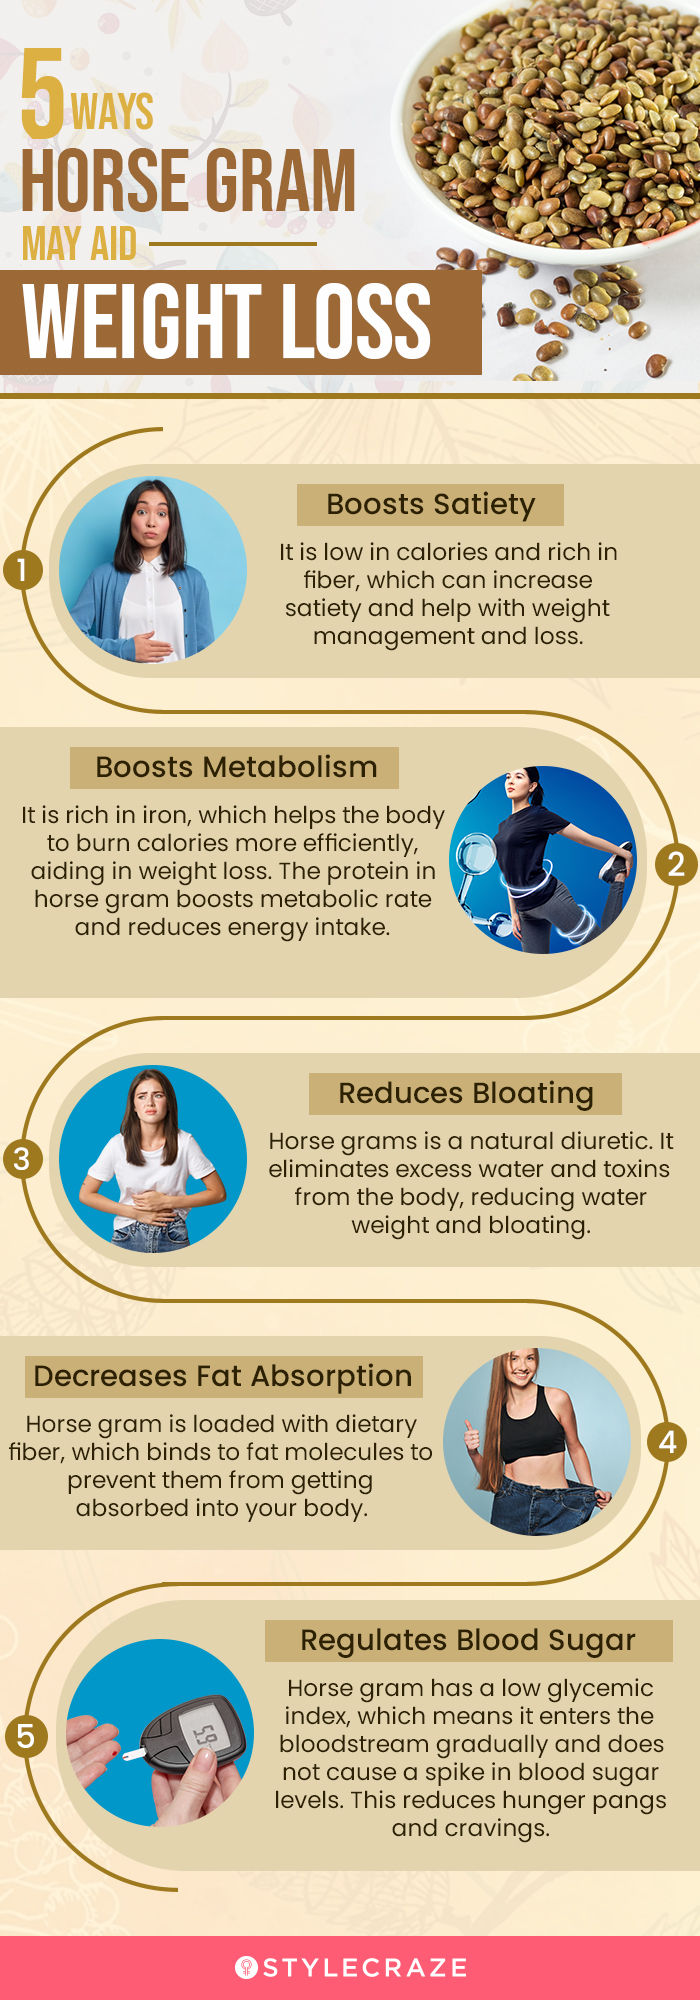 5 ways horse gram may aid weight loss (infographic)